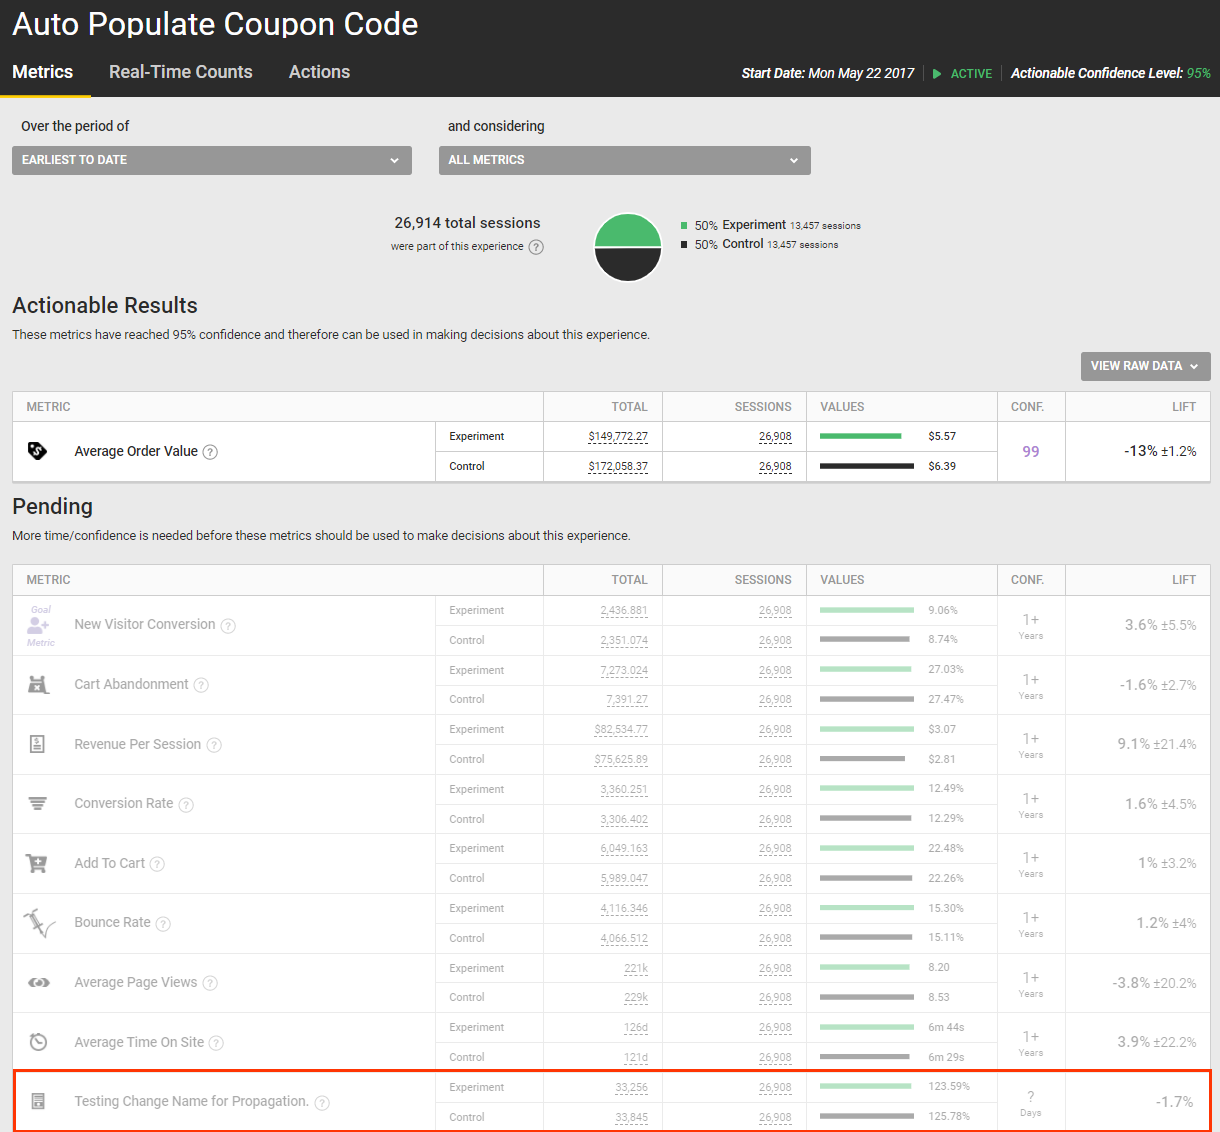 Callout of a custom metric in the Pending table on the Metrics tab of the Experience Results page